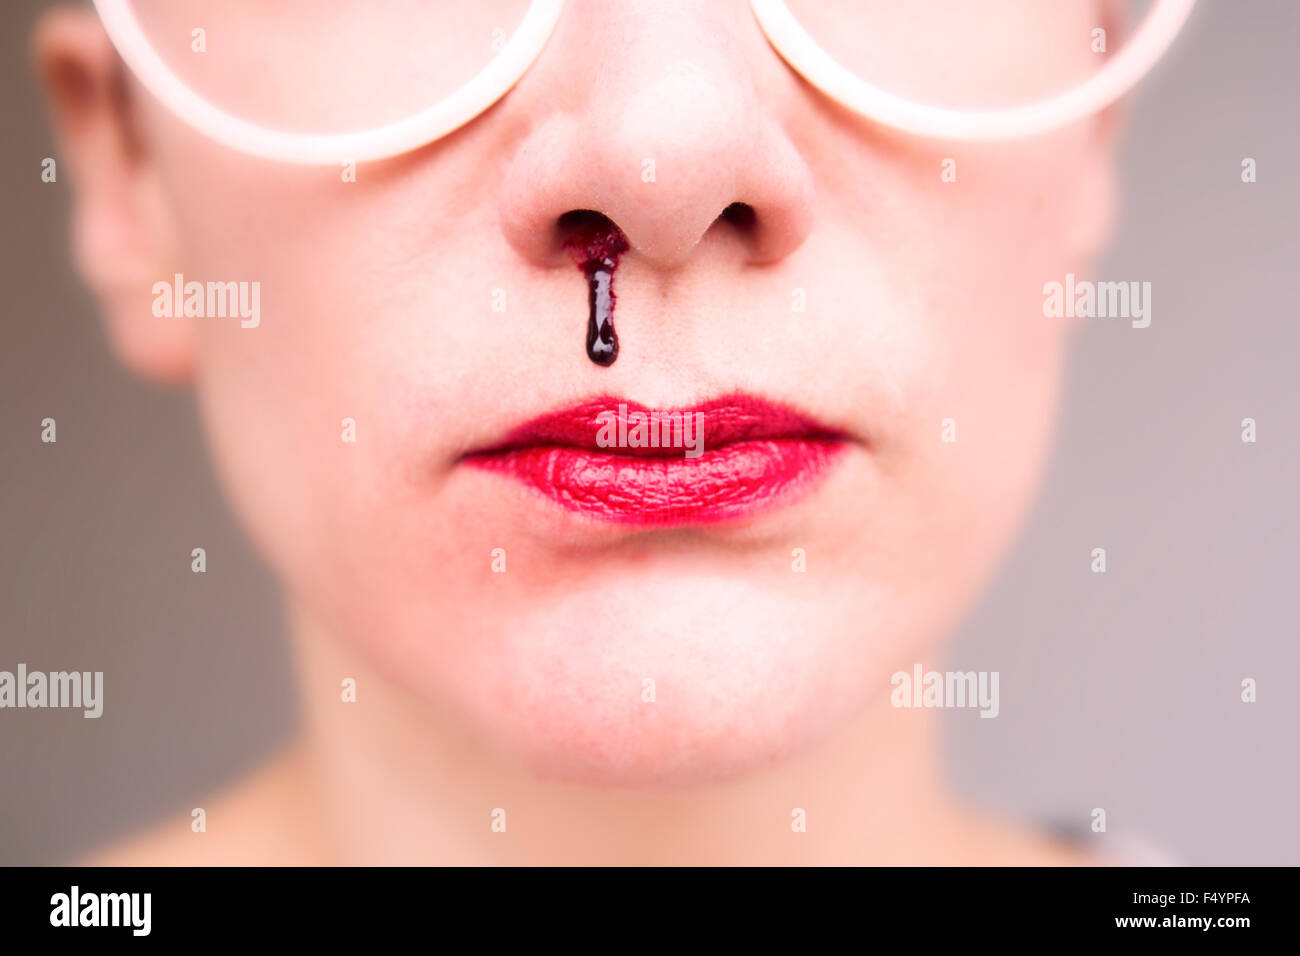 closeup of woman wearing glasses and having nosebleed Stock Photo